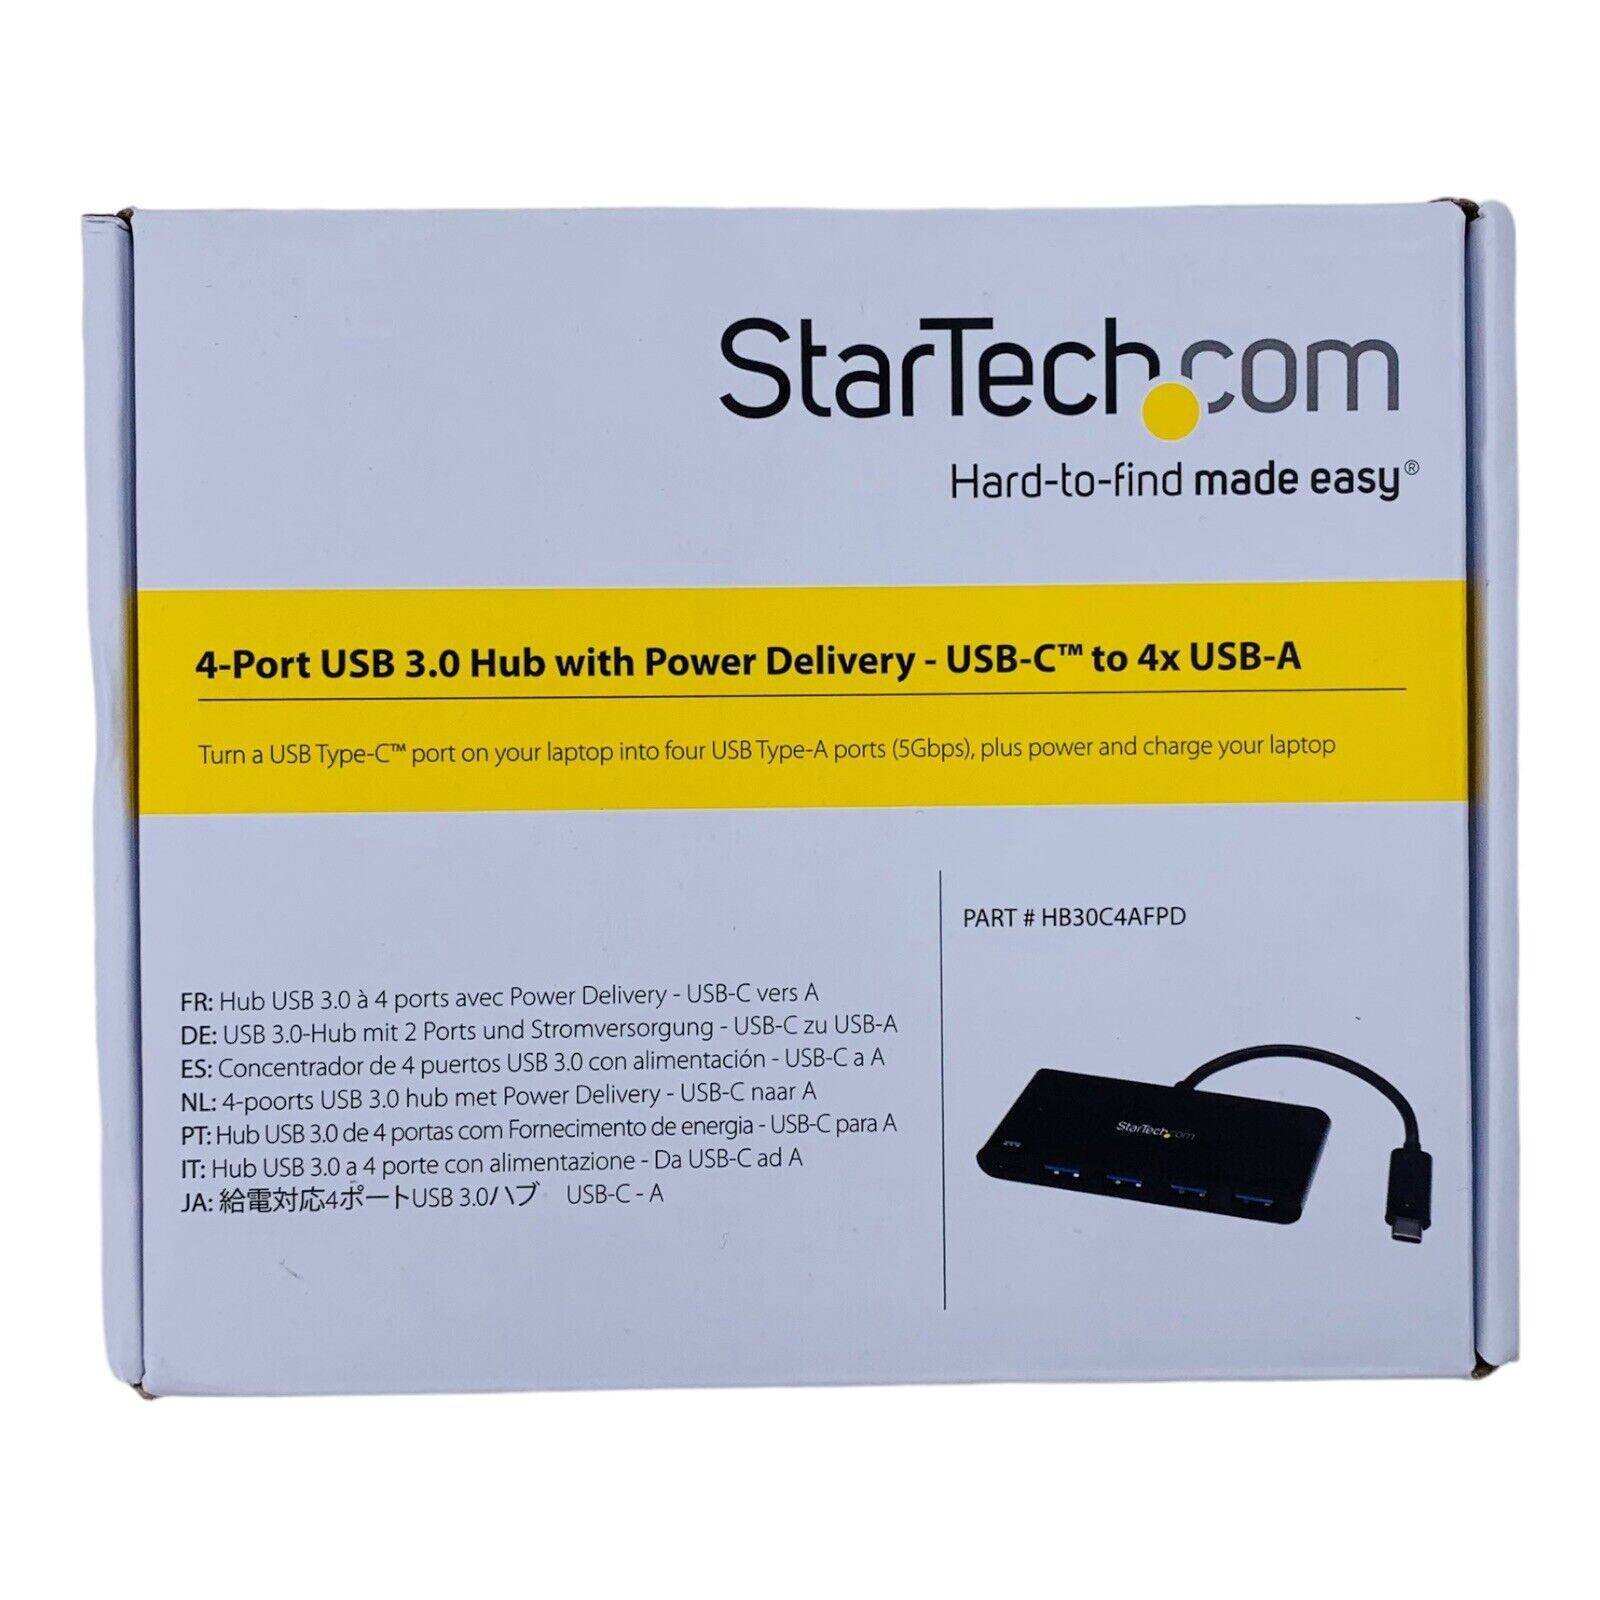 Startech 4-Port USB 3.0 Hub with Power Delivery- USB-C to 4x USB-A, HB30C4AFPD